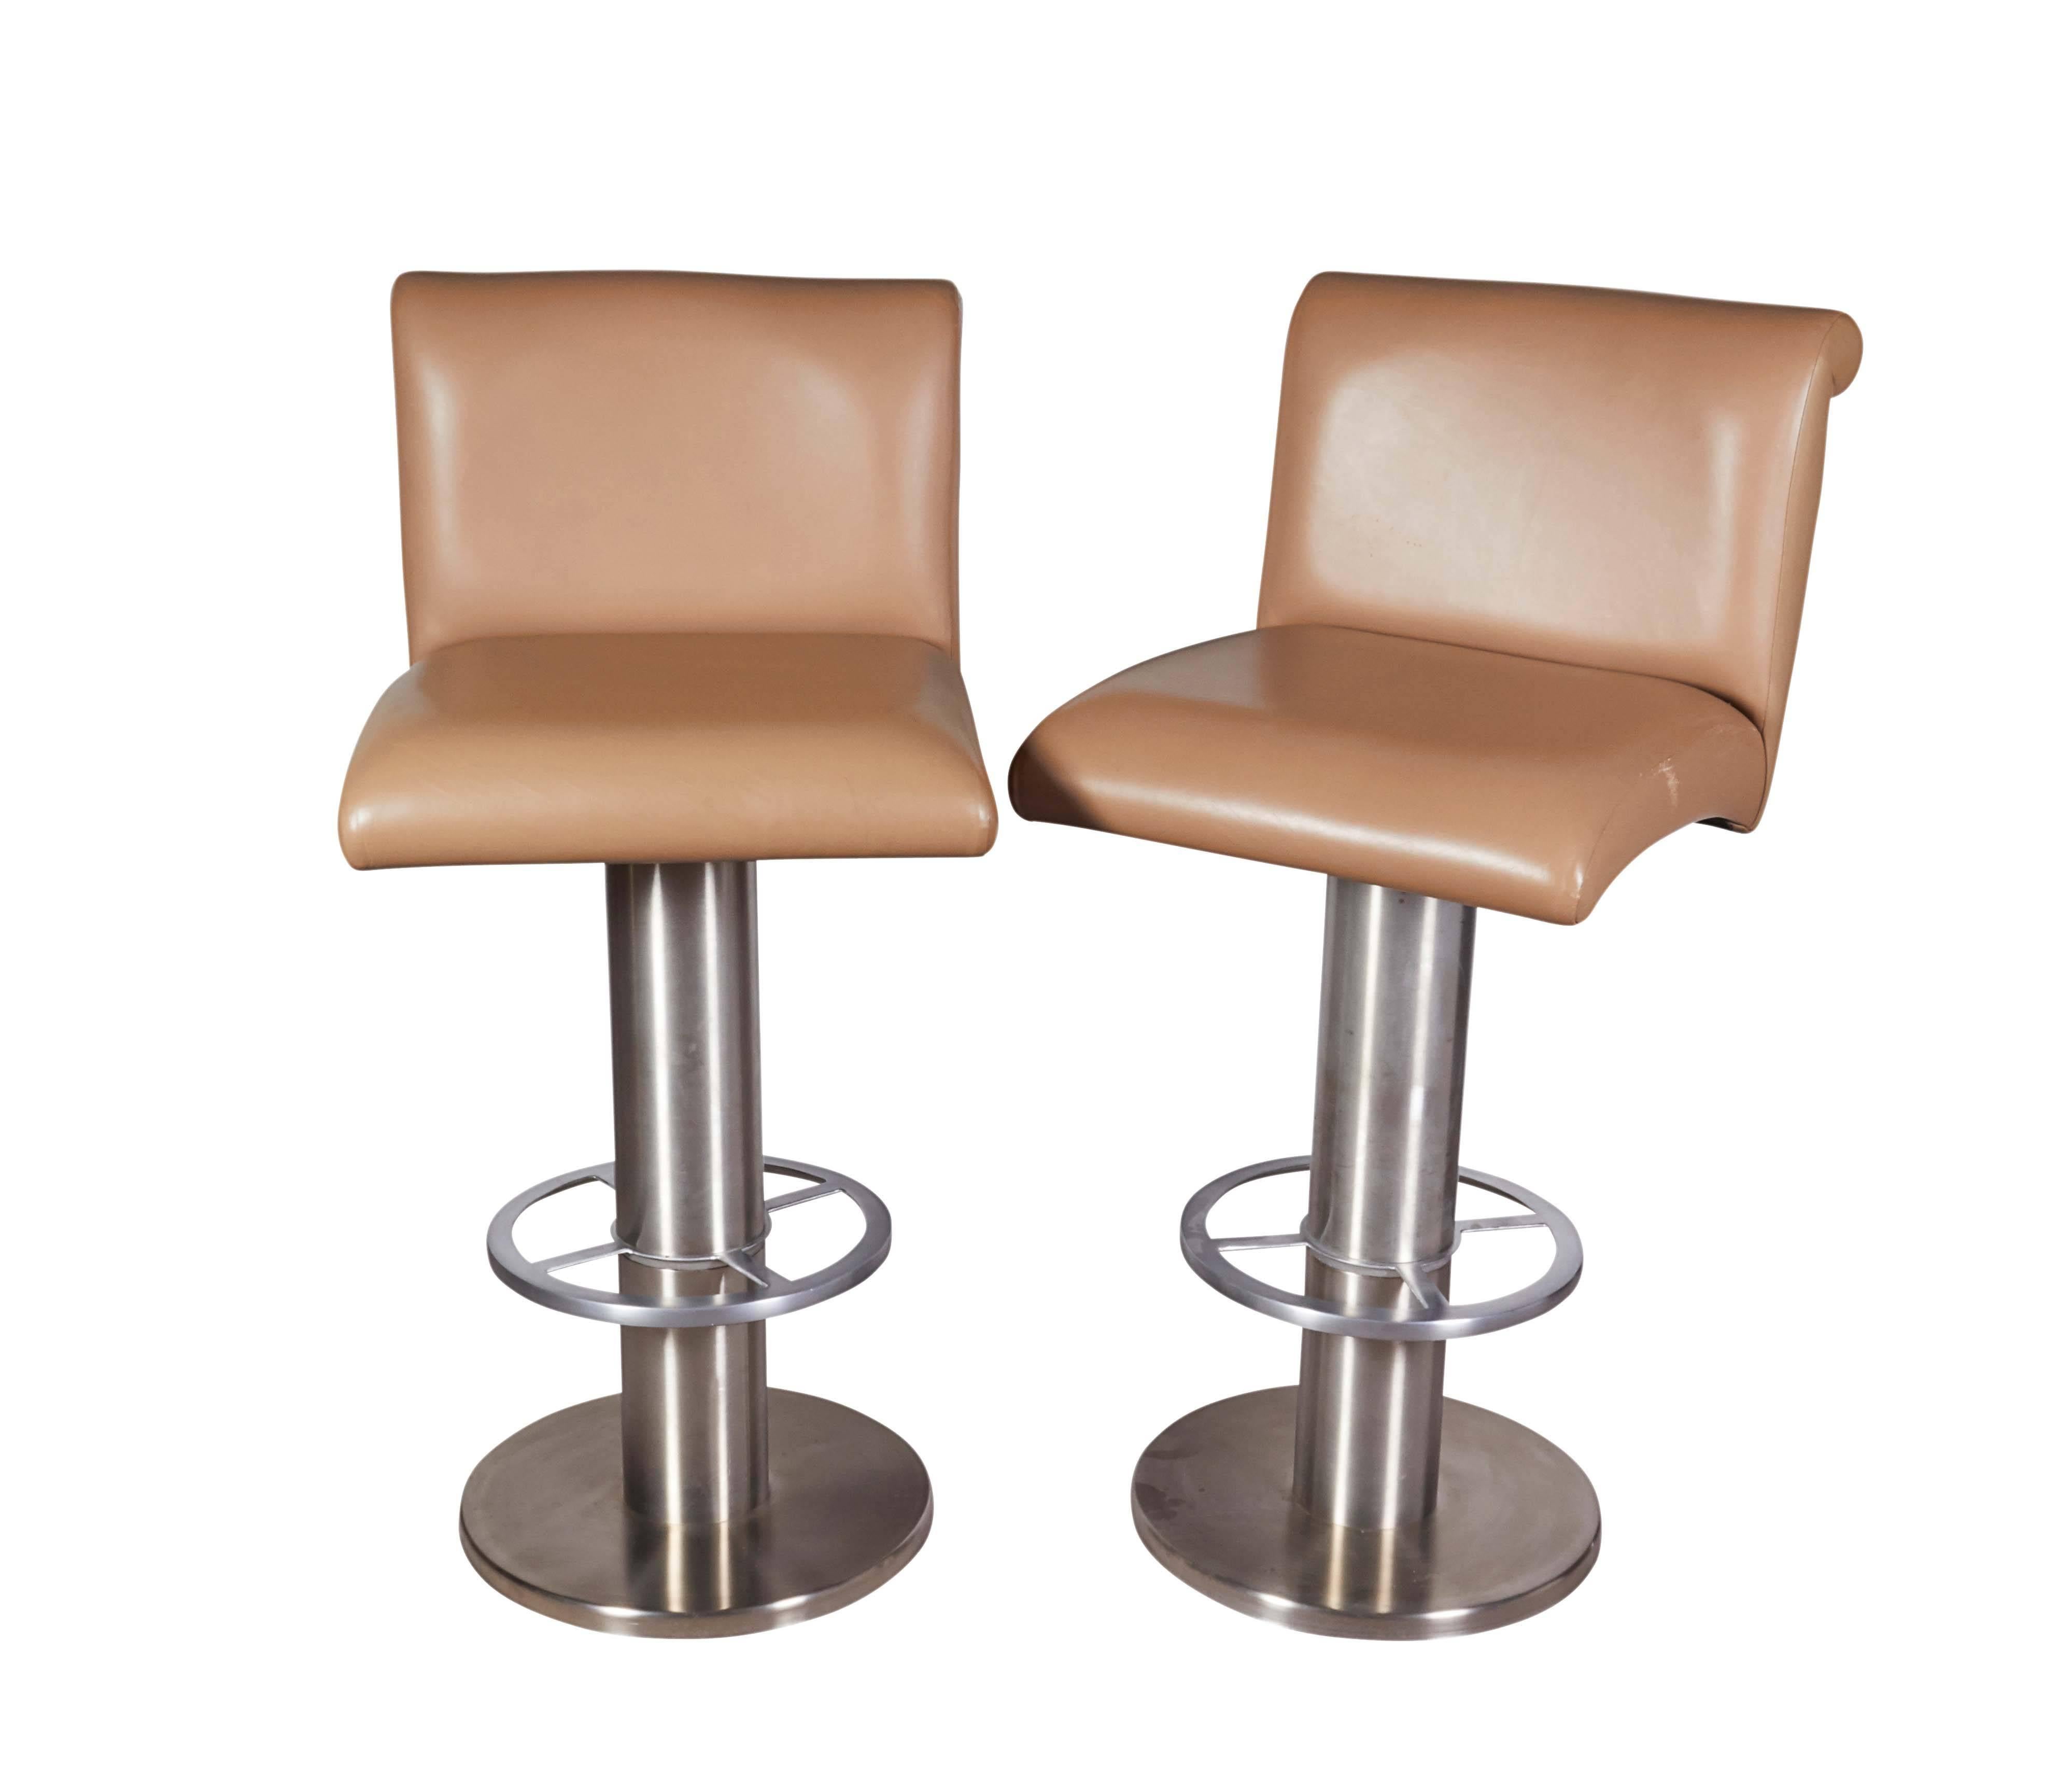 A set of five barstools, manufactured circa 1980s by Design For Leisure, backs and seats upholstered in beige leather, raised on bases in stainless steel. Includes original manufacturer's label. Very good original condition, age appropriate wear to